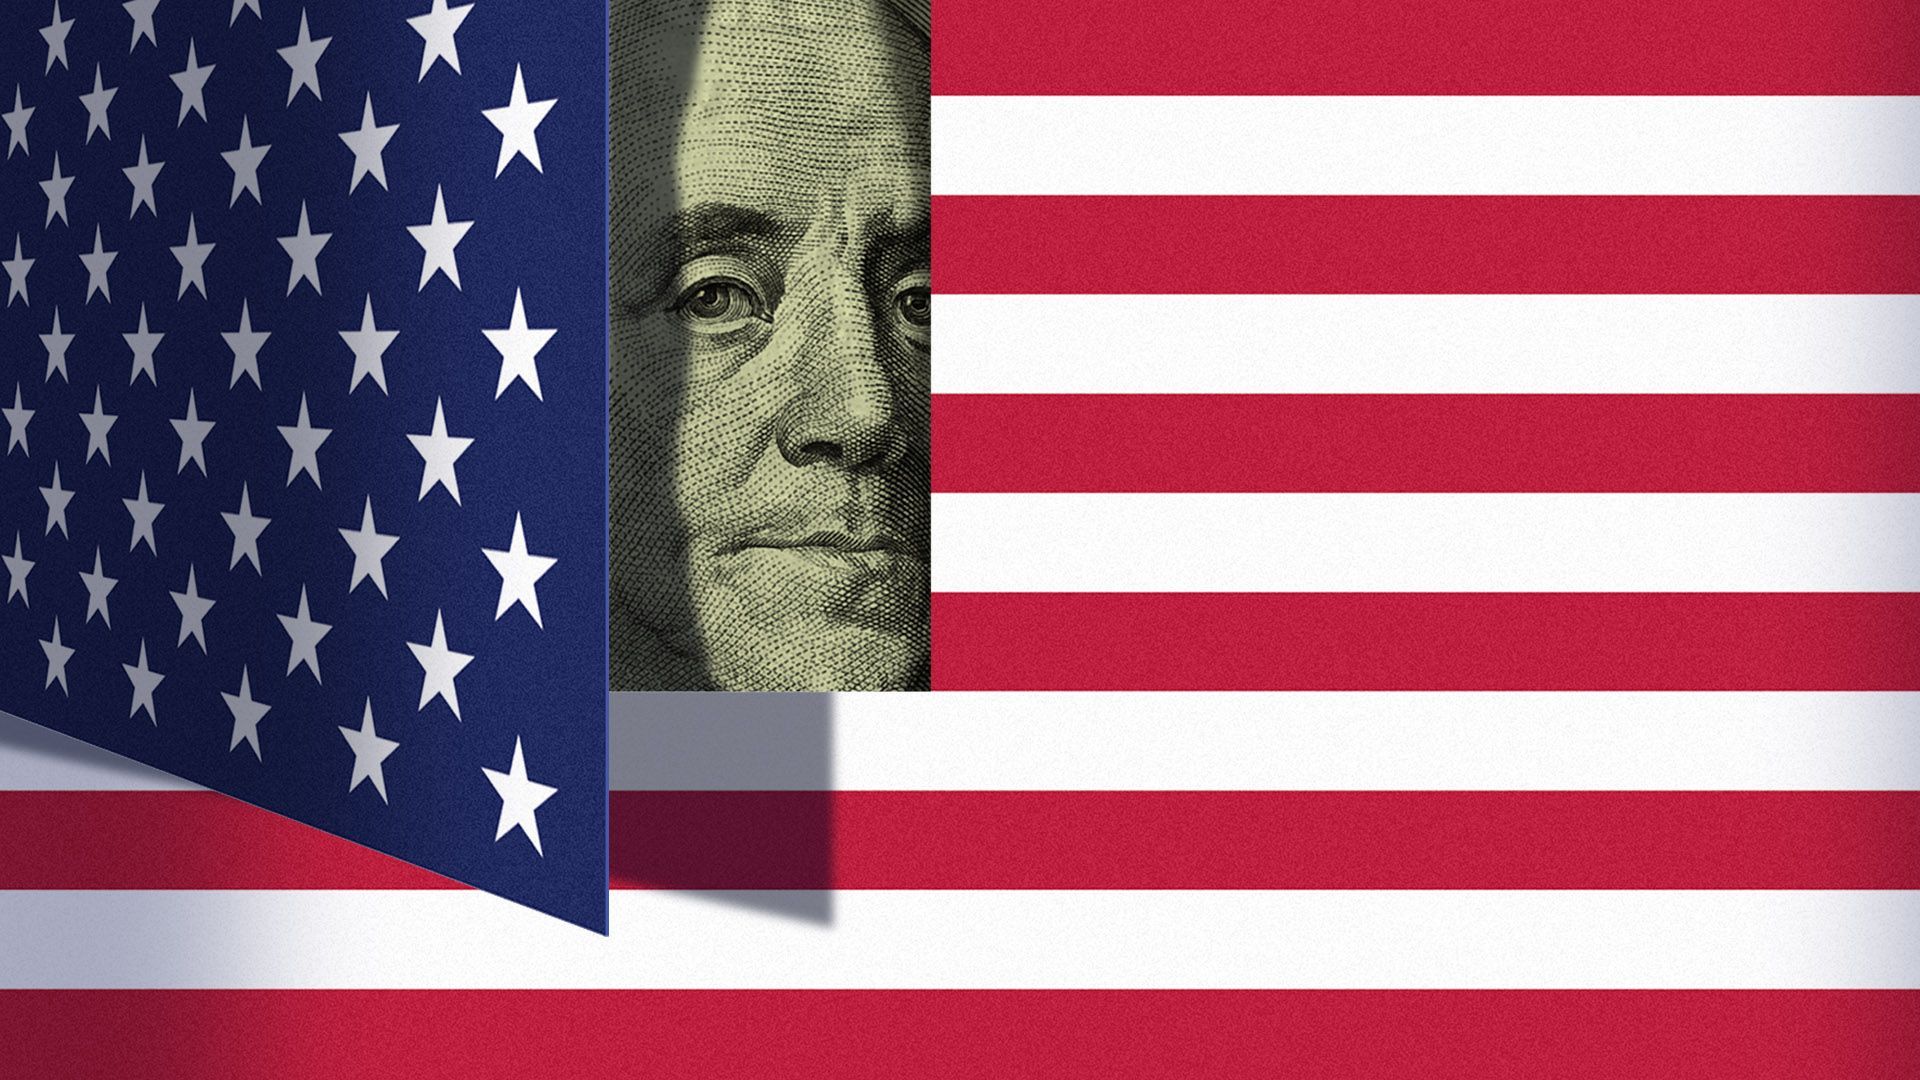 Illustration of Benjamin Franklin from a hundred dollar bill peaking out from behind an "open" American flag